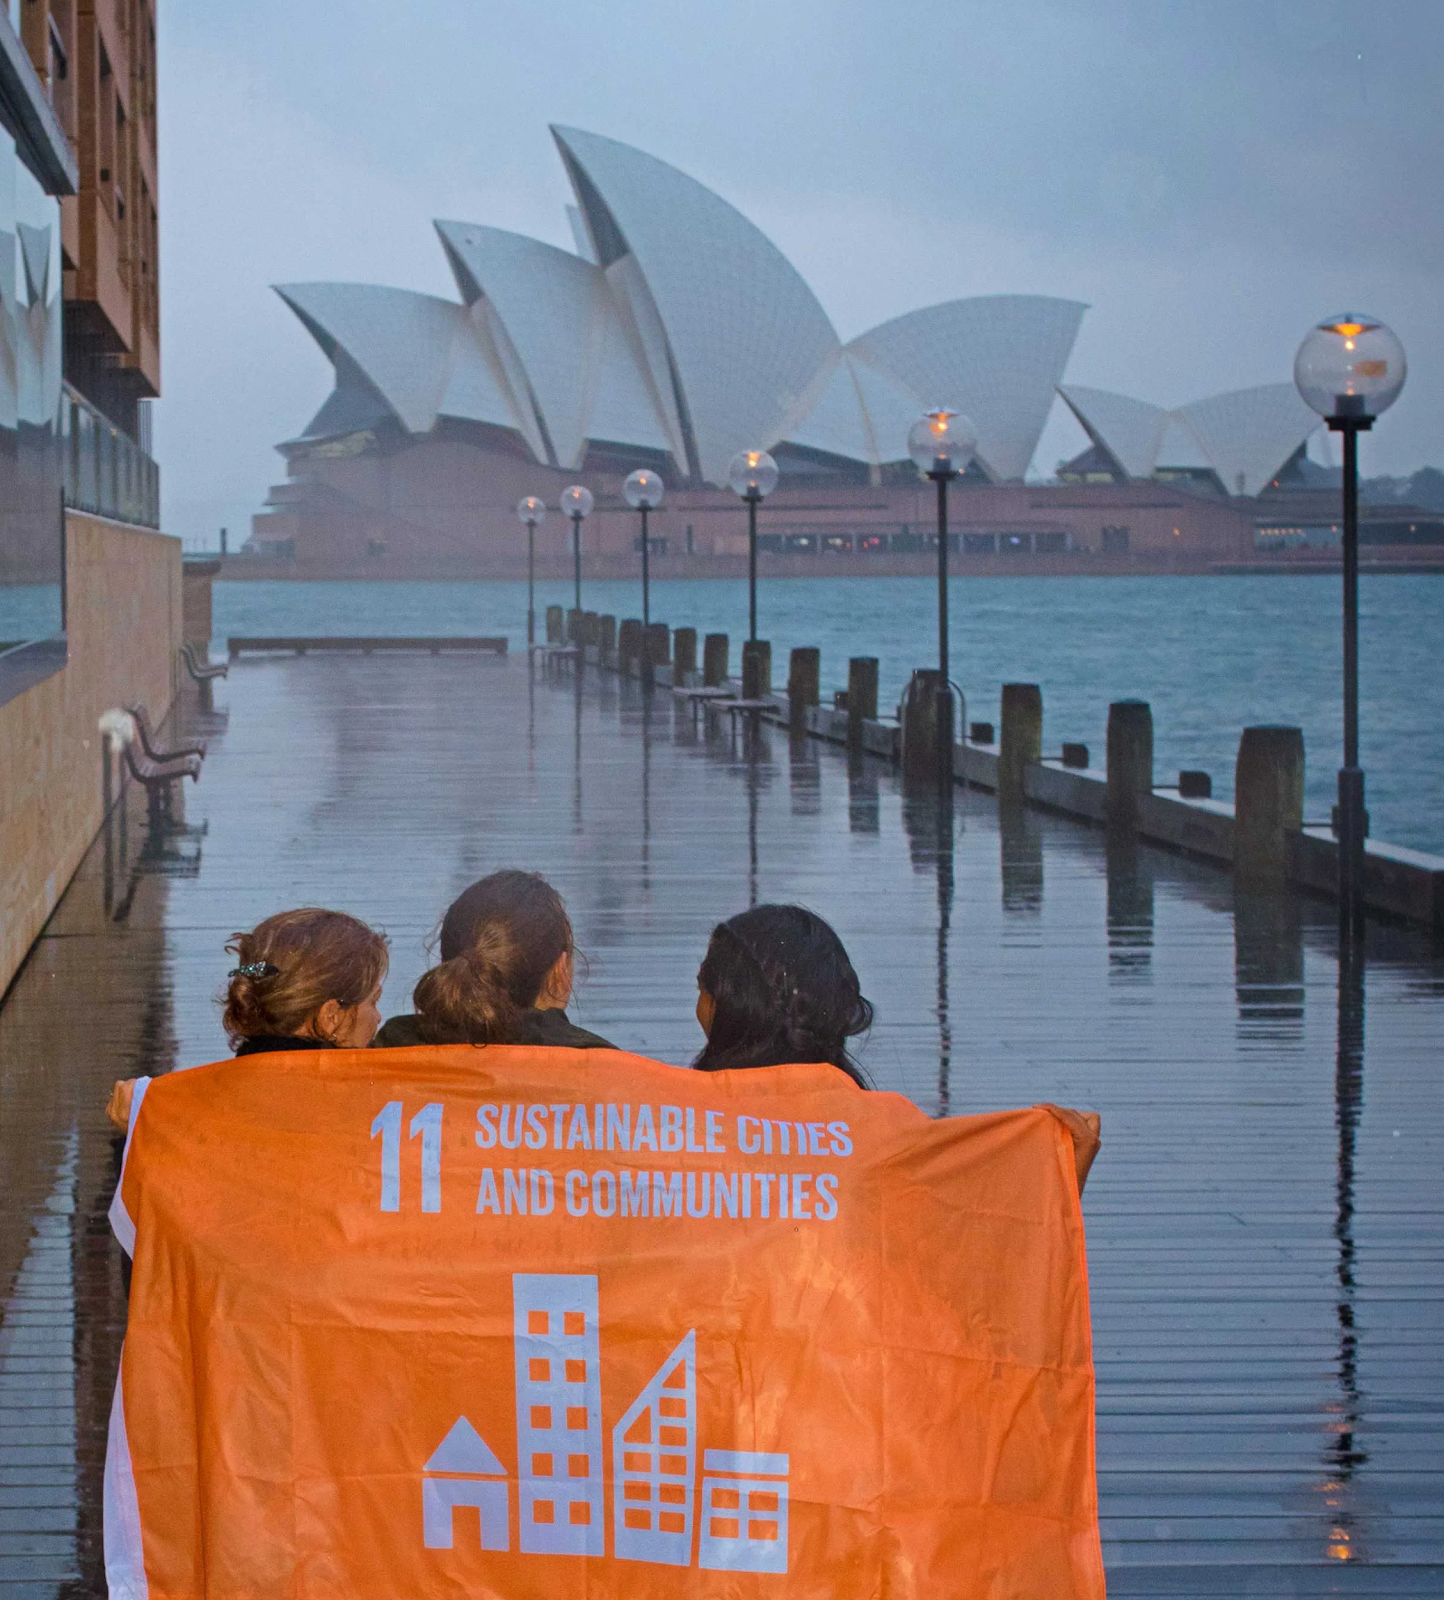 3 students holding the flag for UN's SDG 11 about sustainable cities and communities in Sydney, Australia.